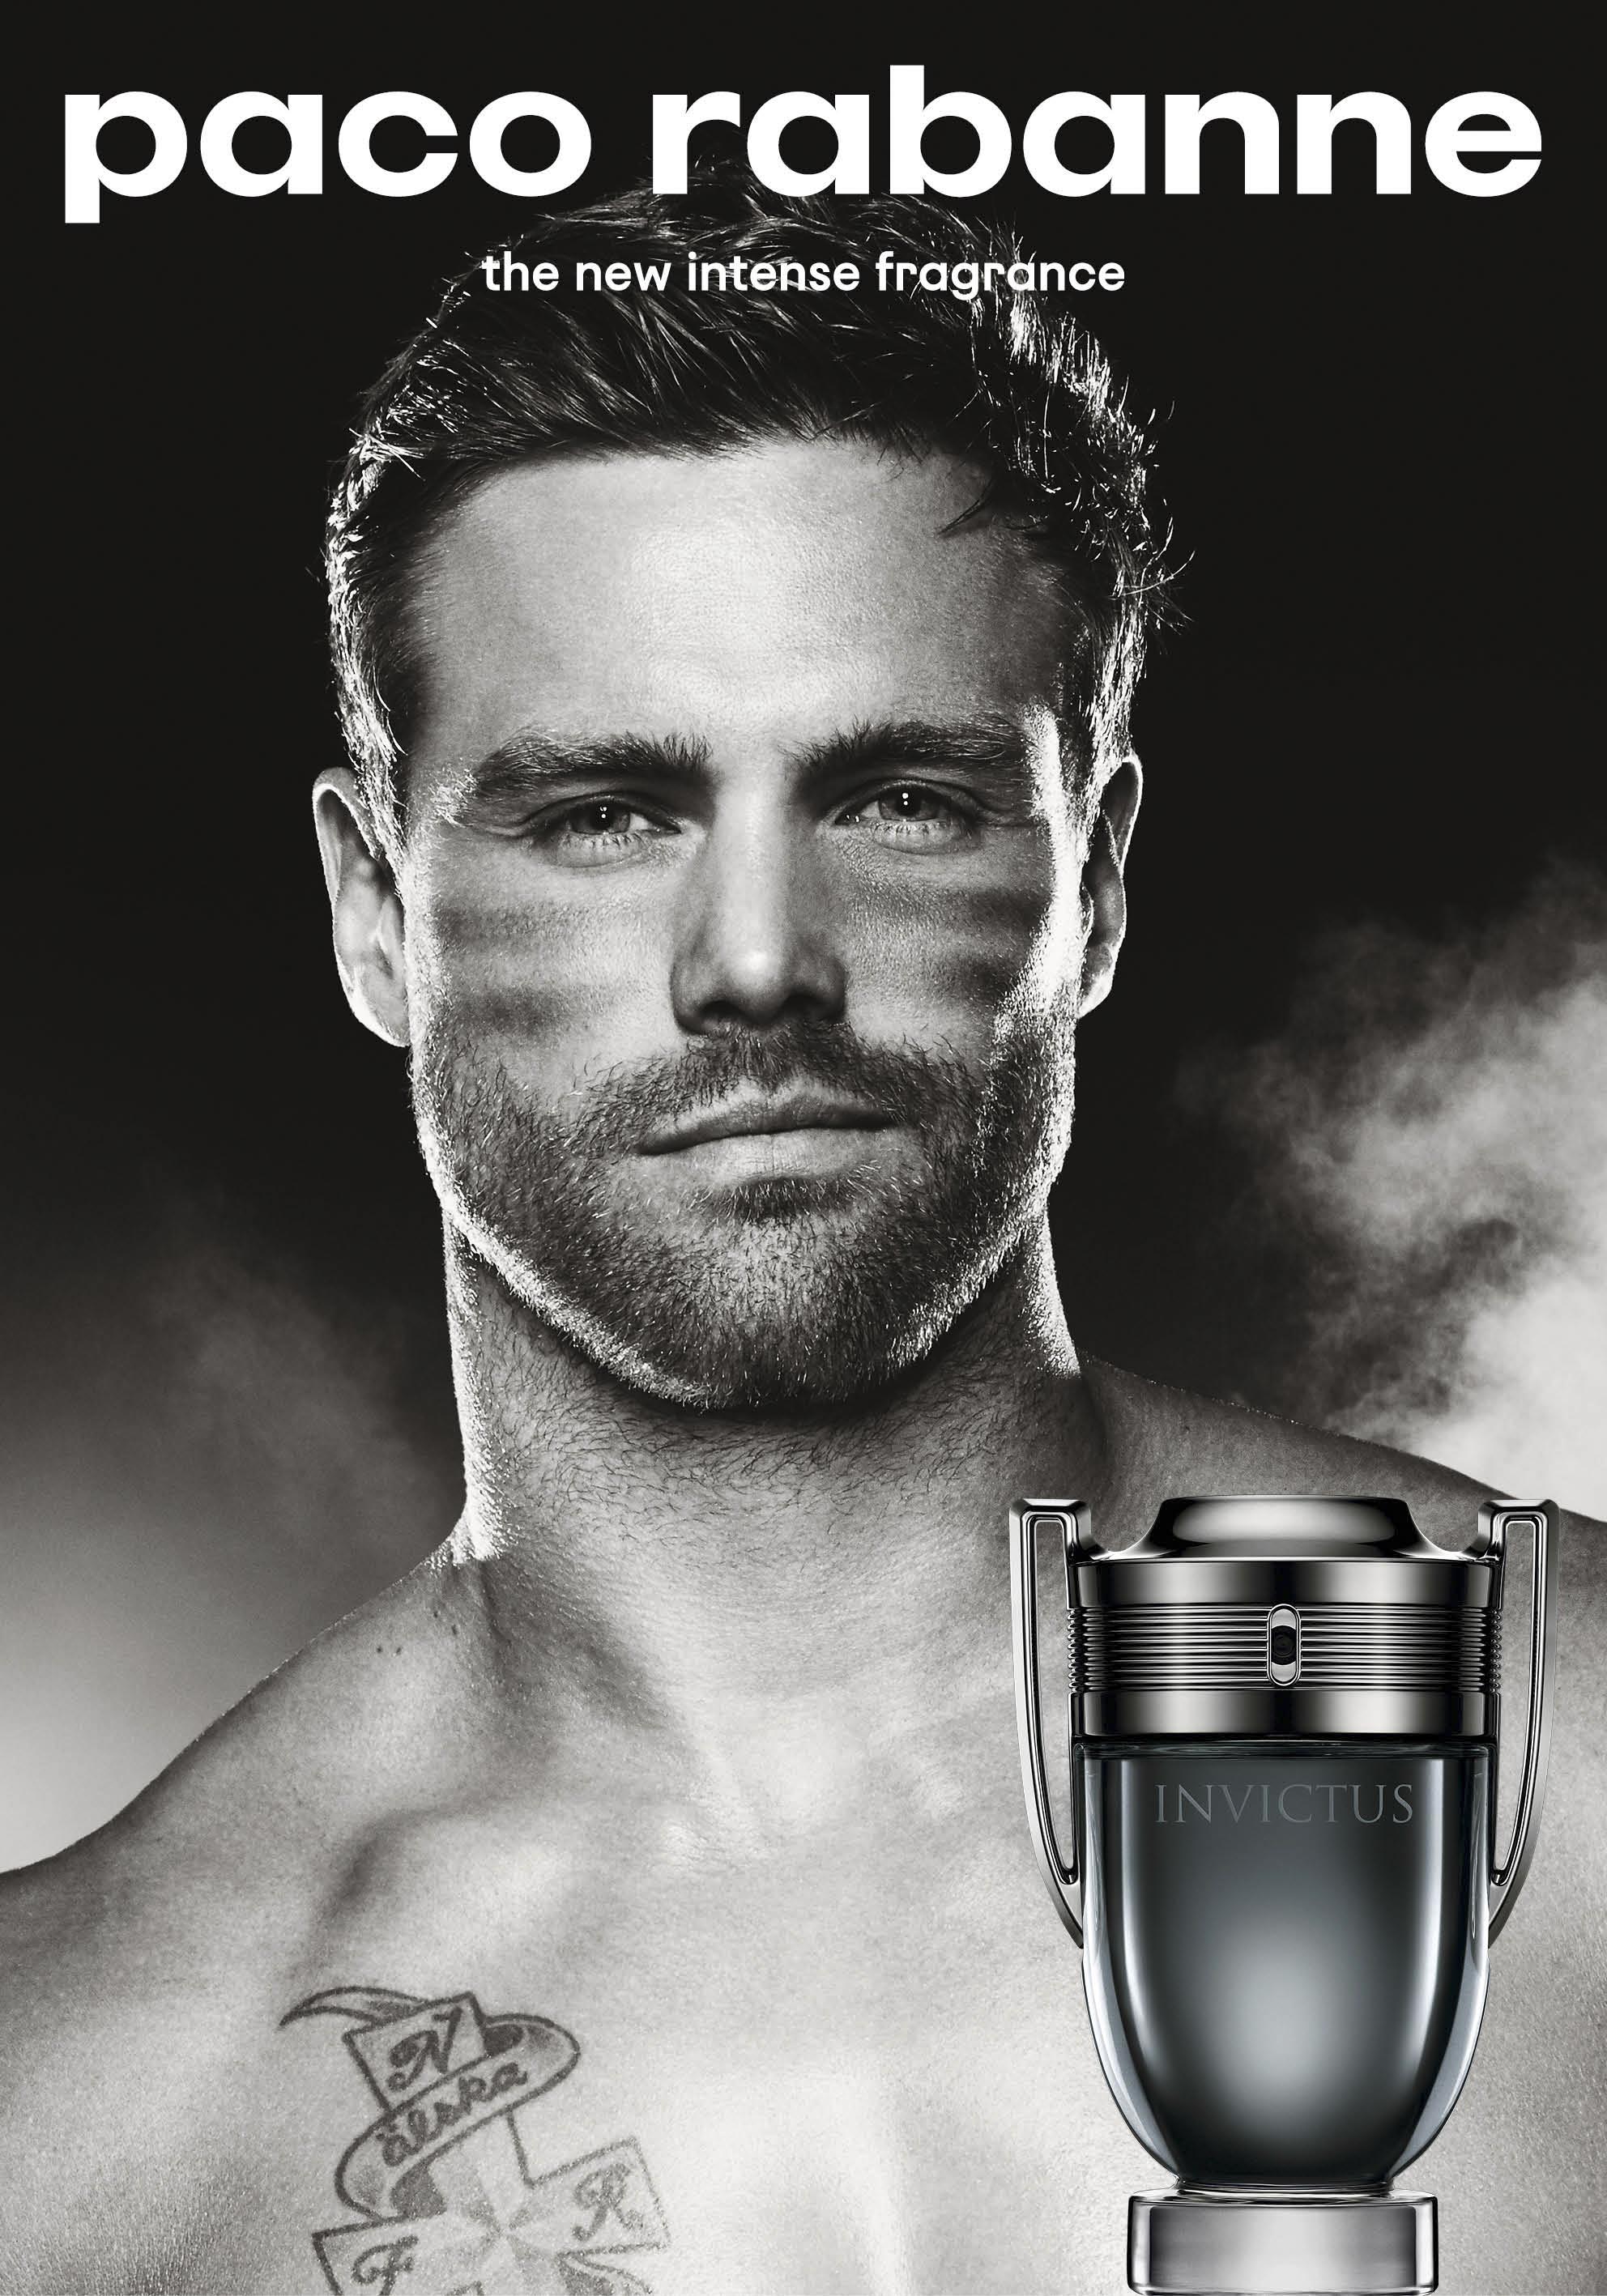 Paco Rabanne Invictus Intense - African Sales Company